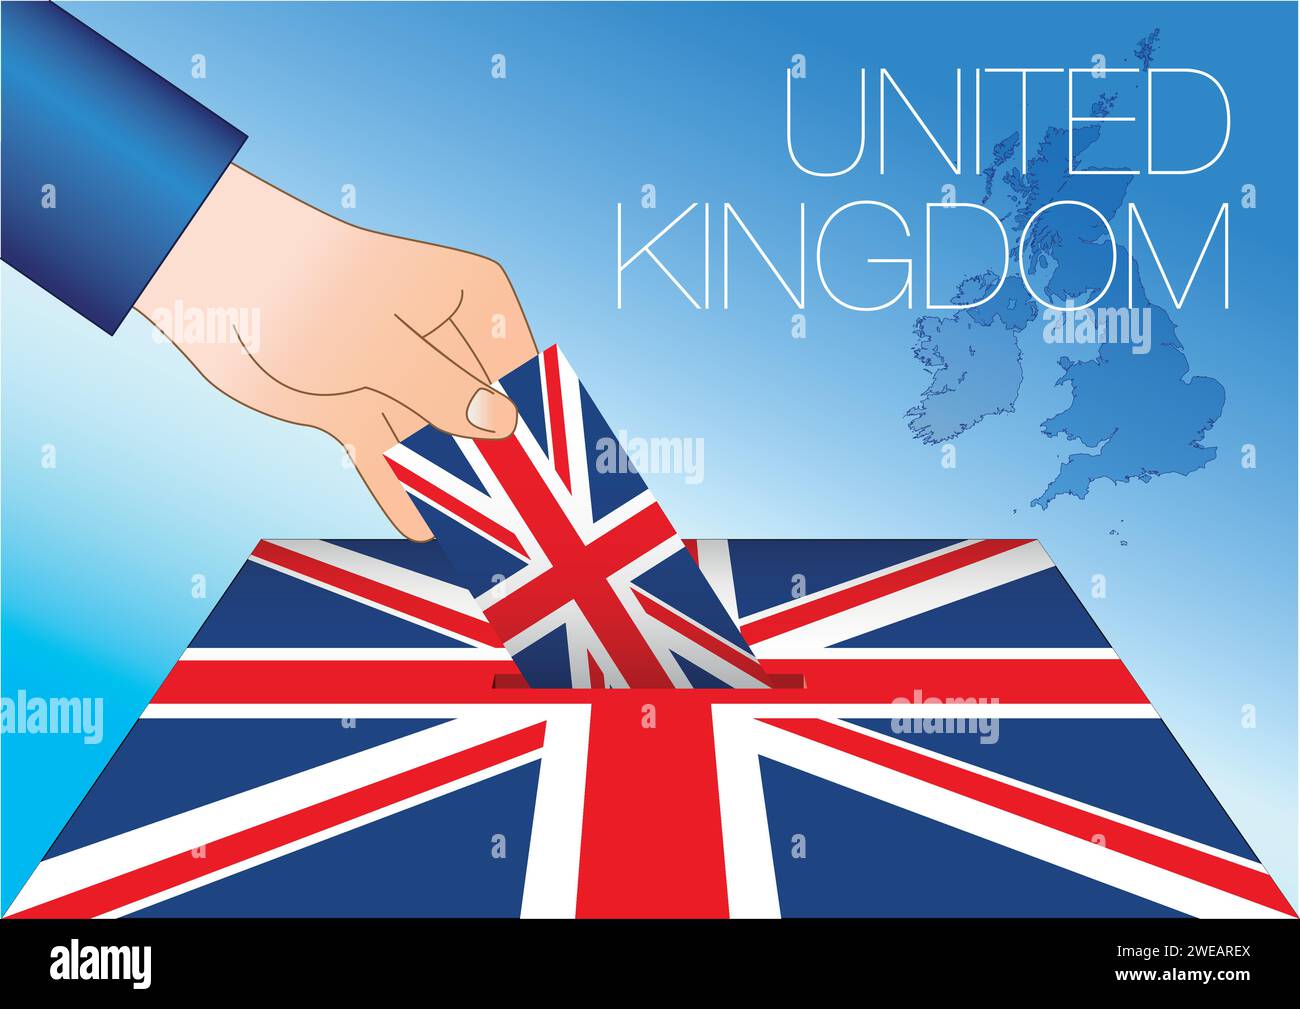 United Kingdom, ballot box with national flag and map, vector illustration Stock Vector